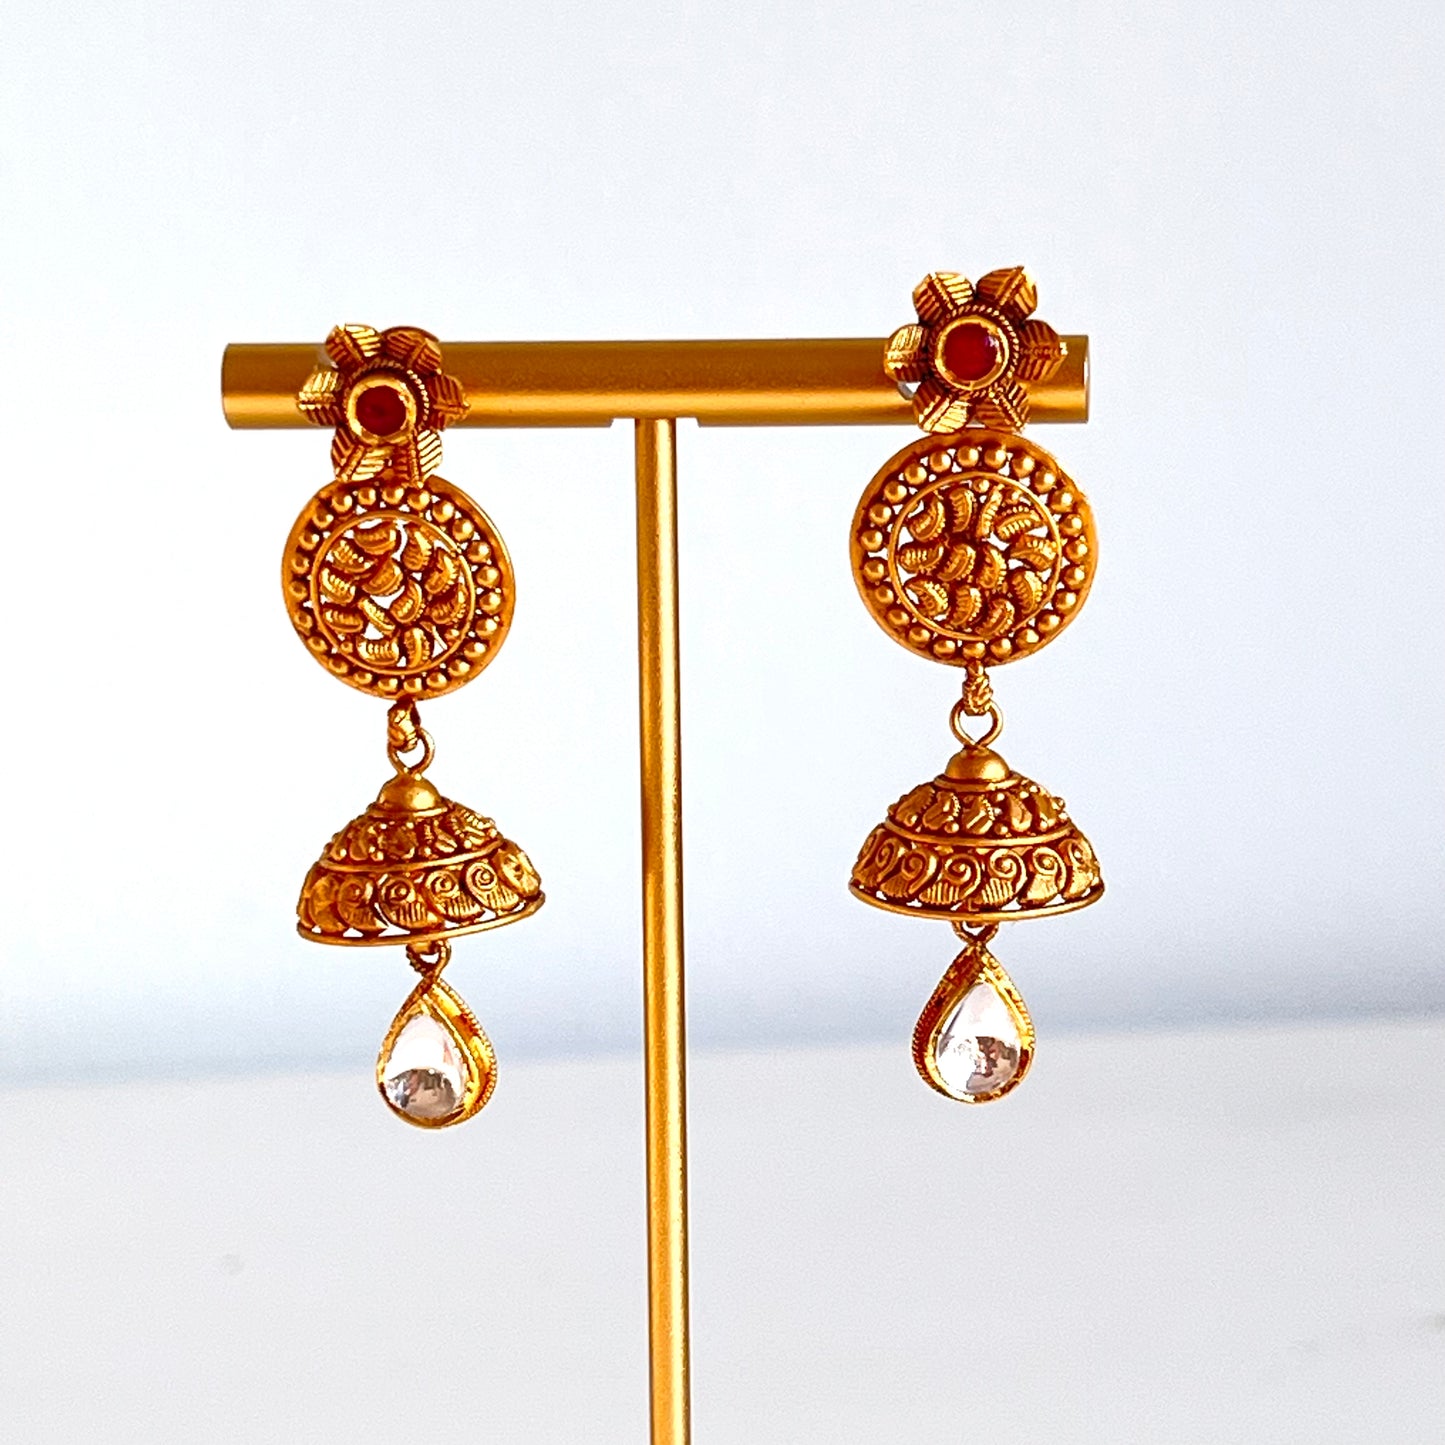 Edgy Antique Earrings with Colored Stones